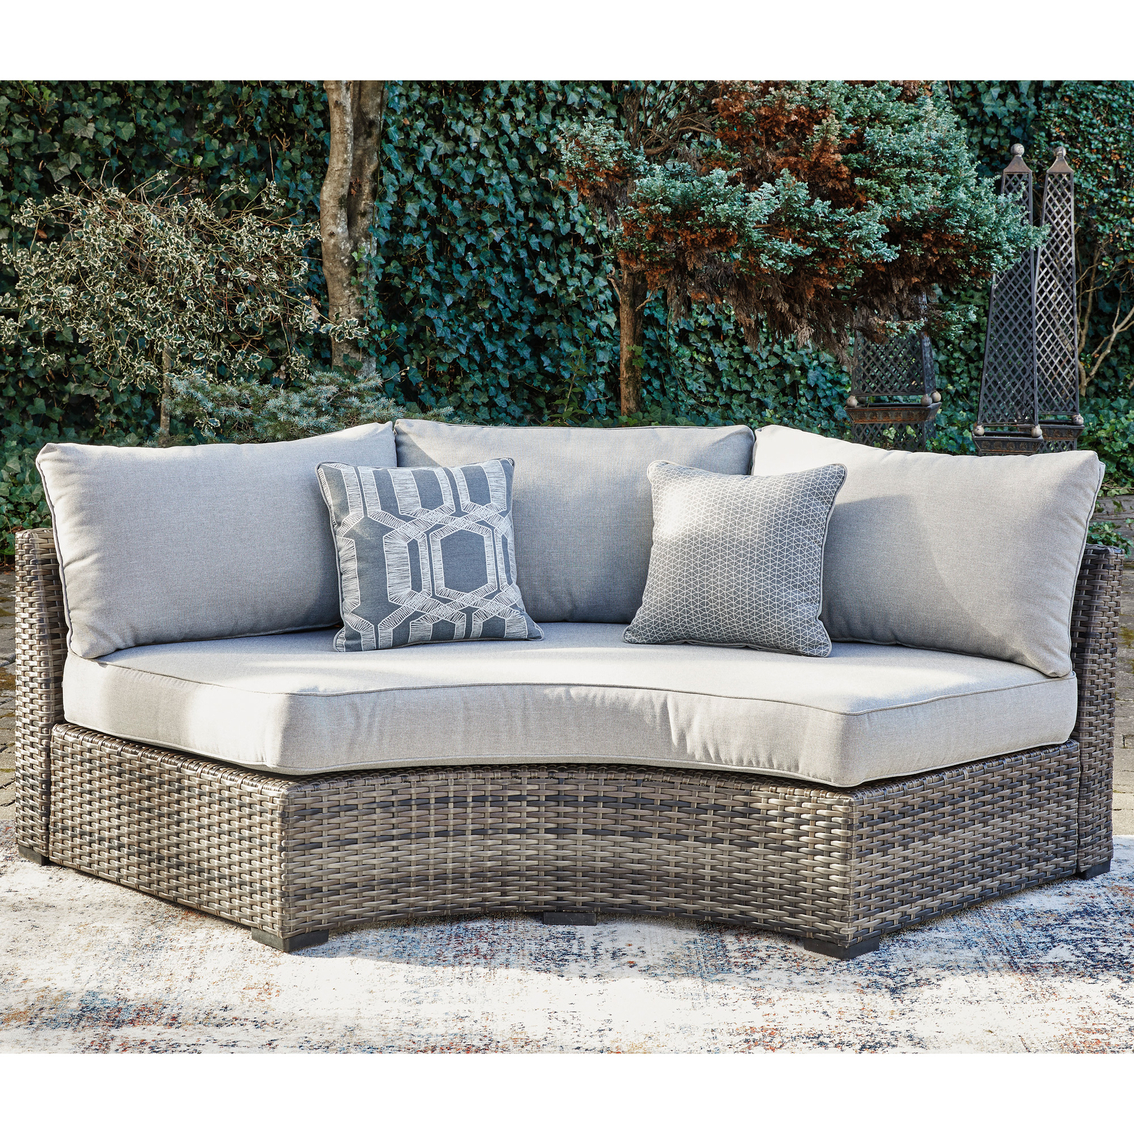 Signature Design by Ashley Harbor Court 7 pc. Outdoor Set - Image 3 of 6